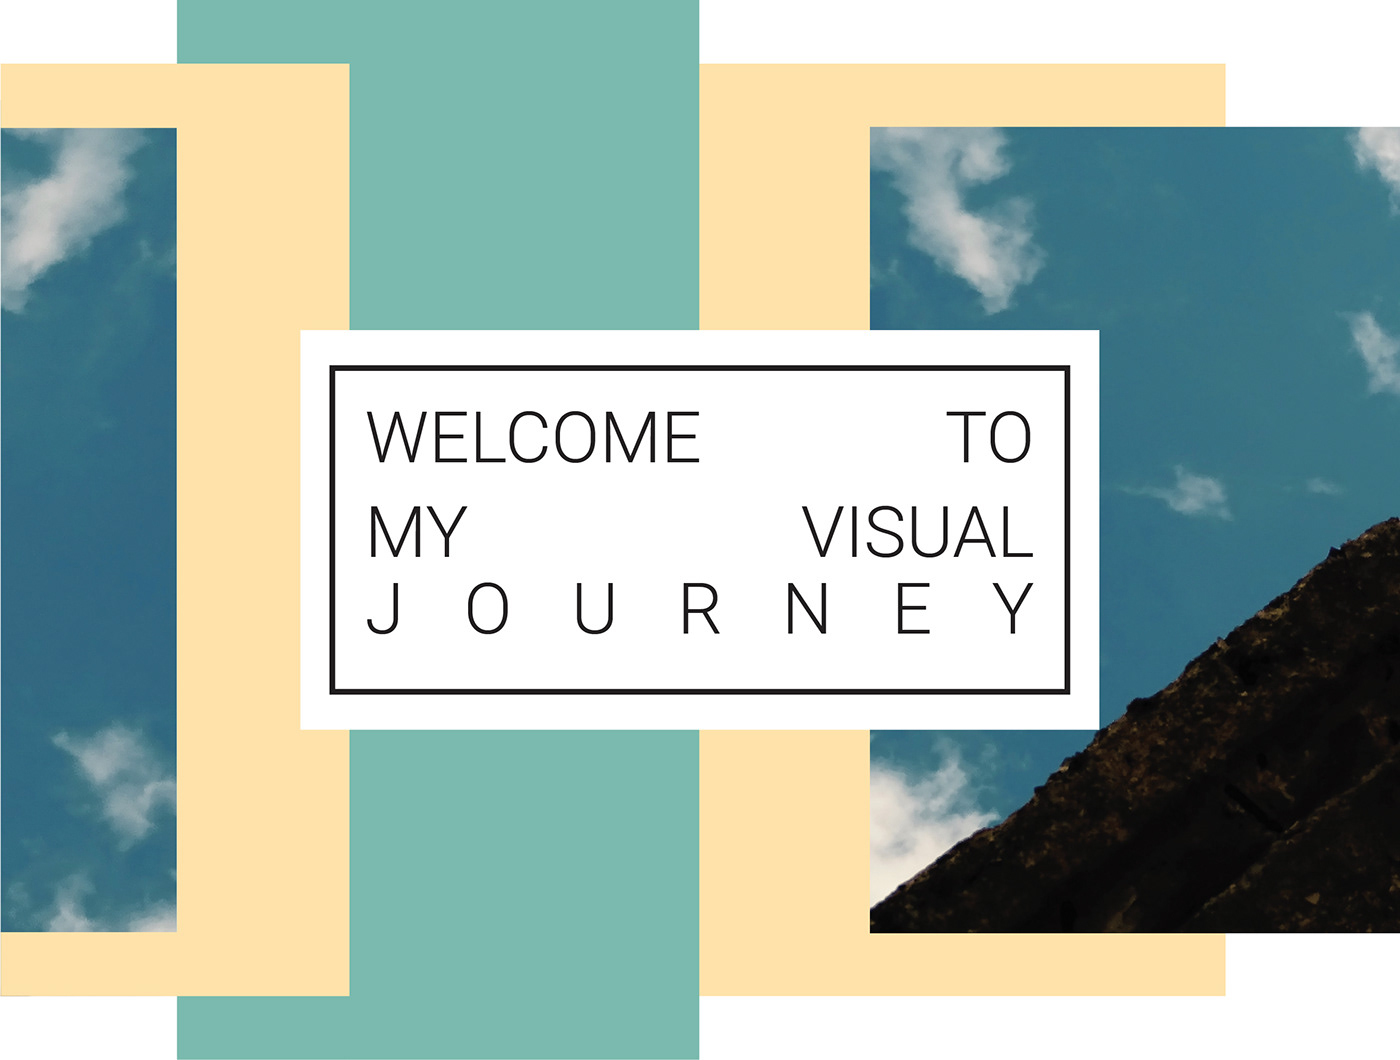 Visual Communication gestalt photograpy Layout graphic project colors